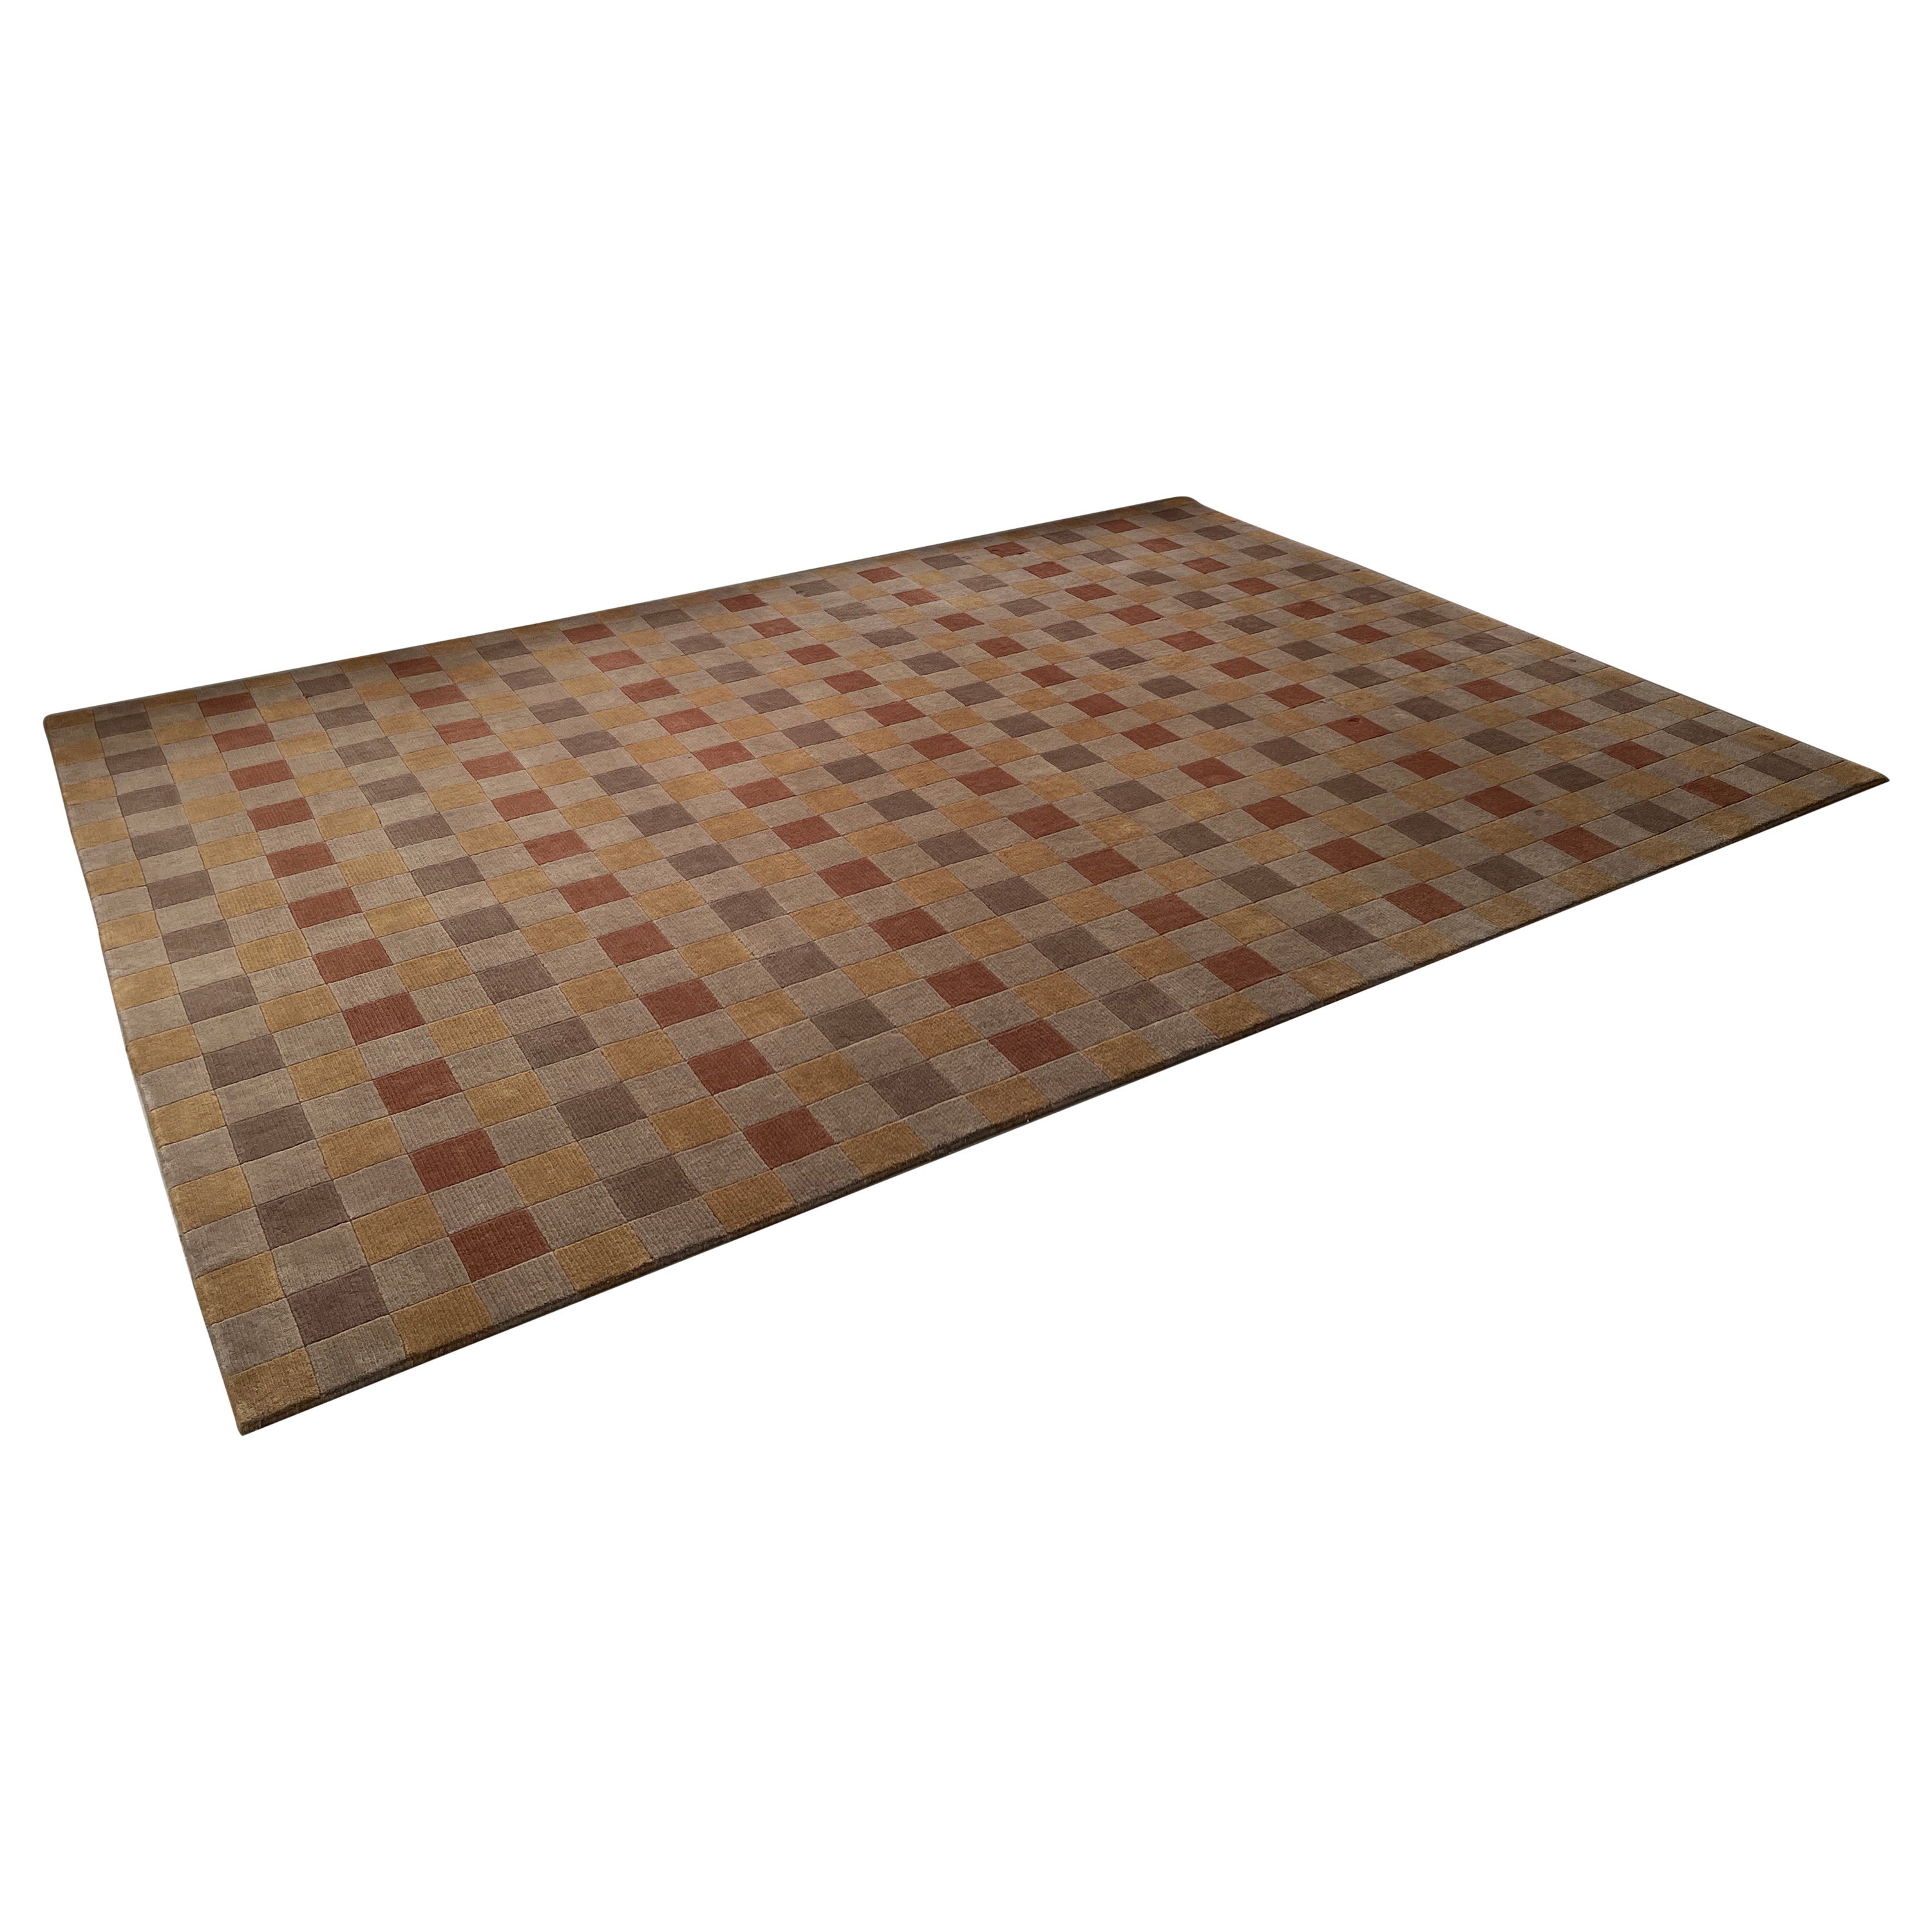 20th century checkered wool and silk rug in a marvelous natural color way. Very large beautiful rug that will bring a neutral earthy aesthetic feel to your home. Perfect for any living room or bedroom. 
     